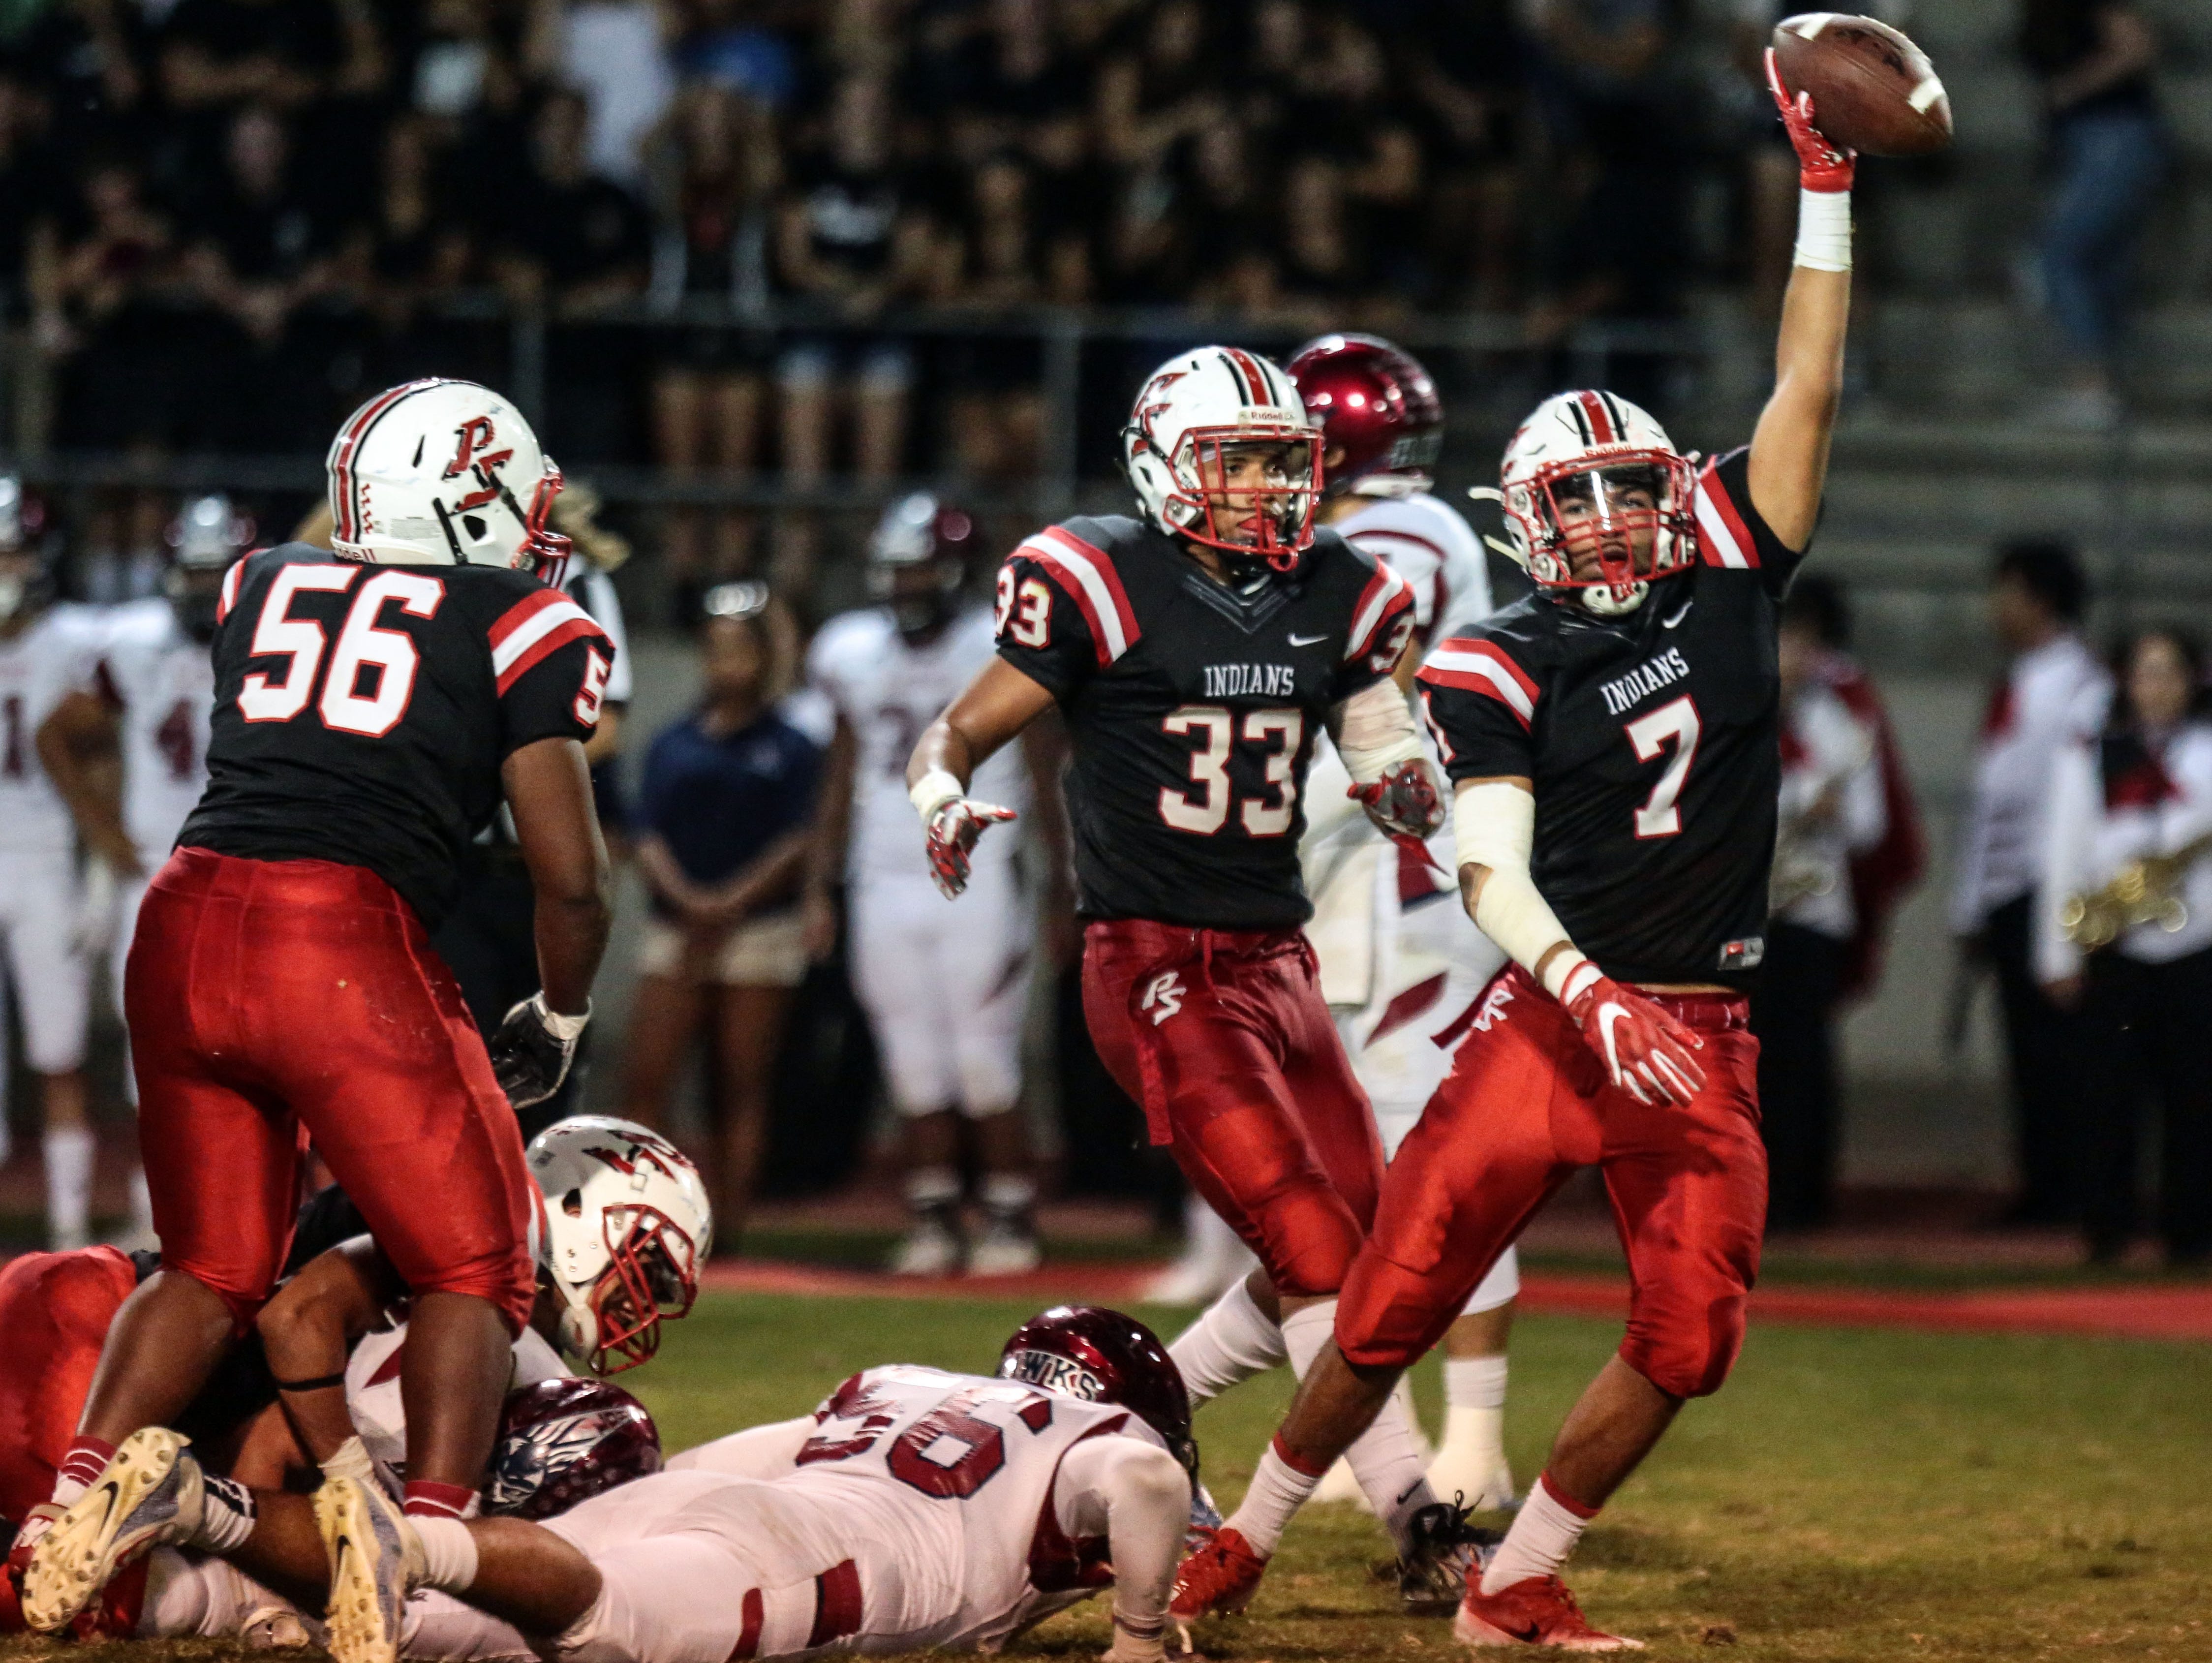 Palm Springs Frankie Kidd picks up a La Quinta fumble in the last seconds of the first half on Friday, September 30, 2016 in Palm Springs.